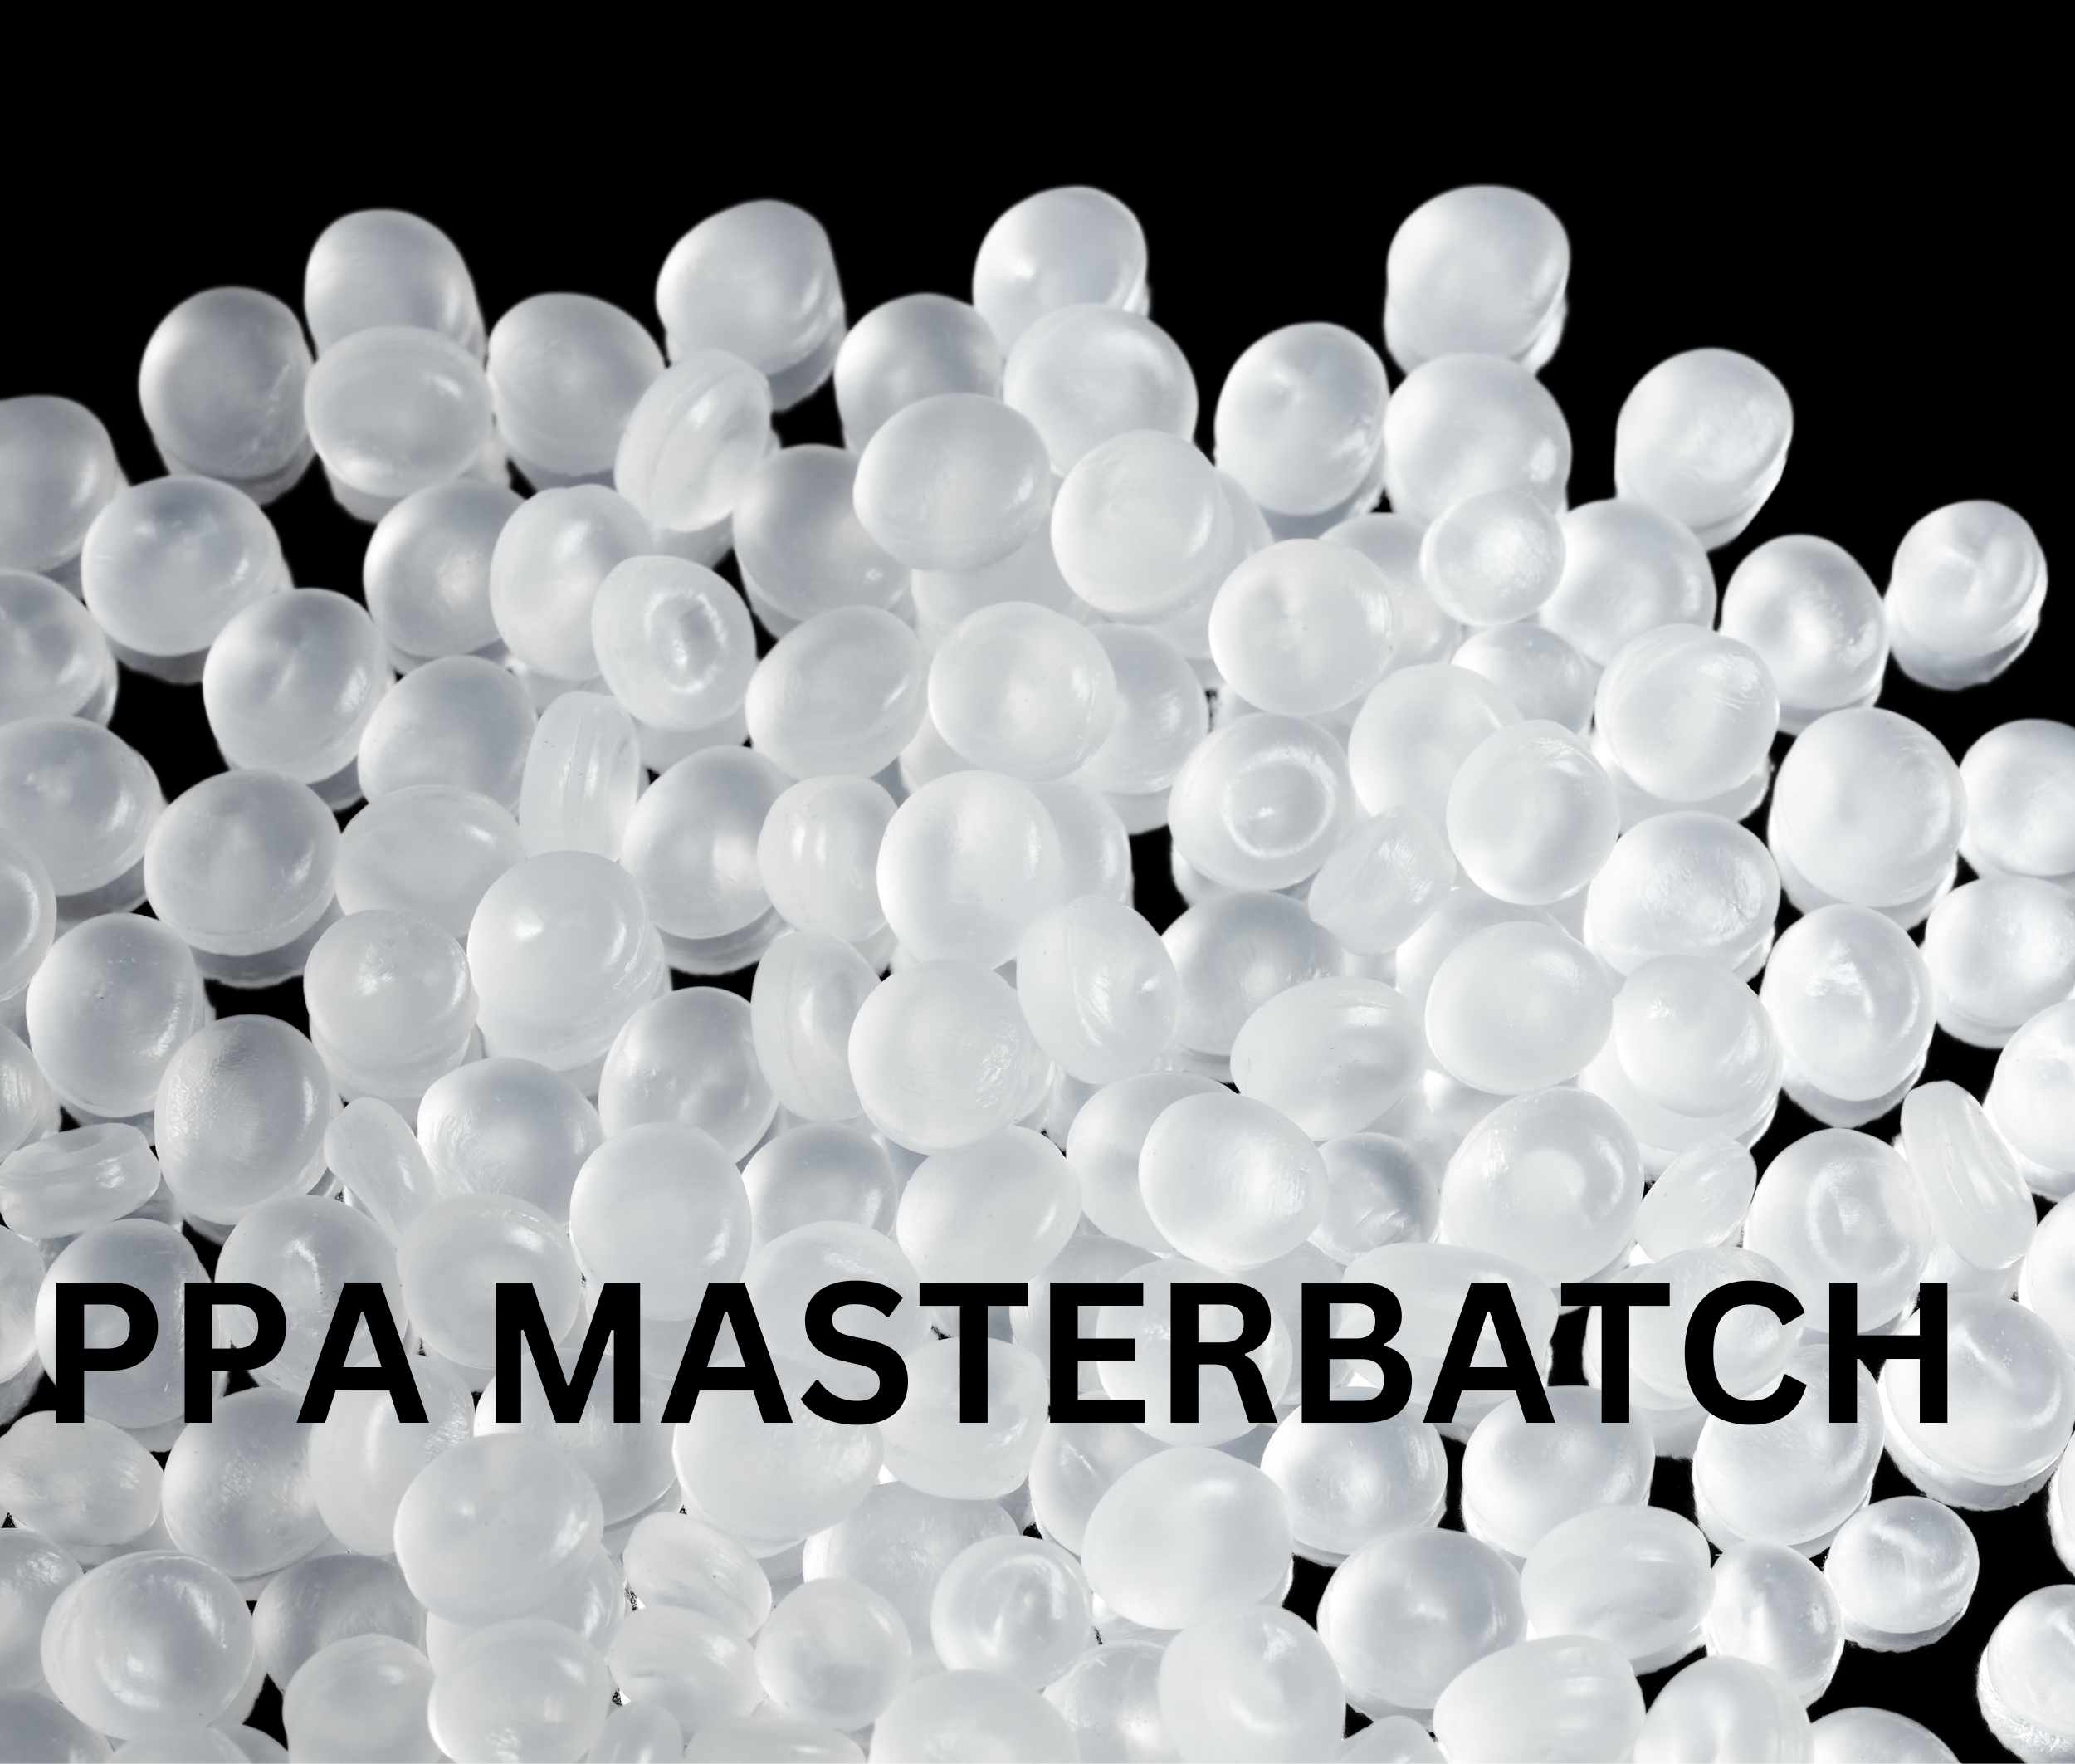 PPA Masterbatch with White Background and Text Entered in Image